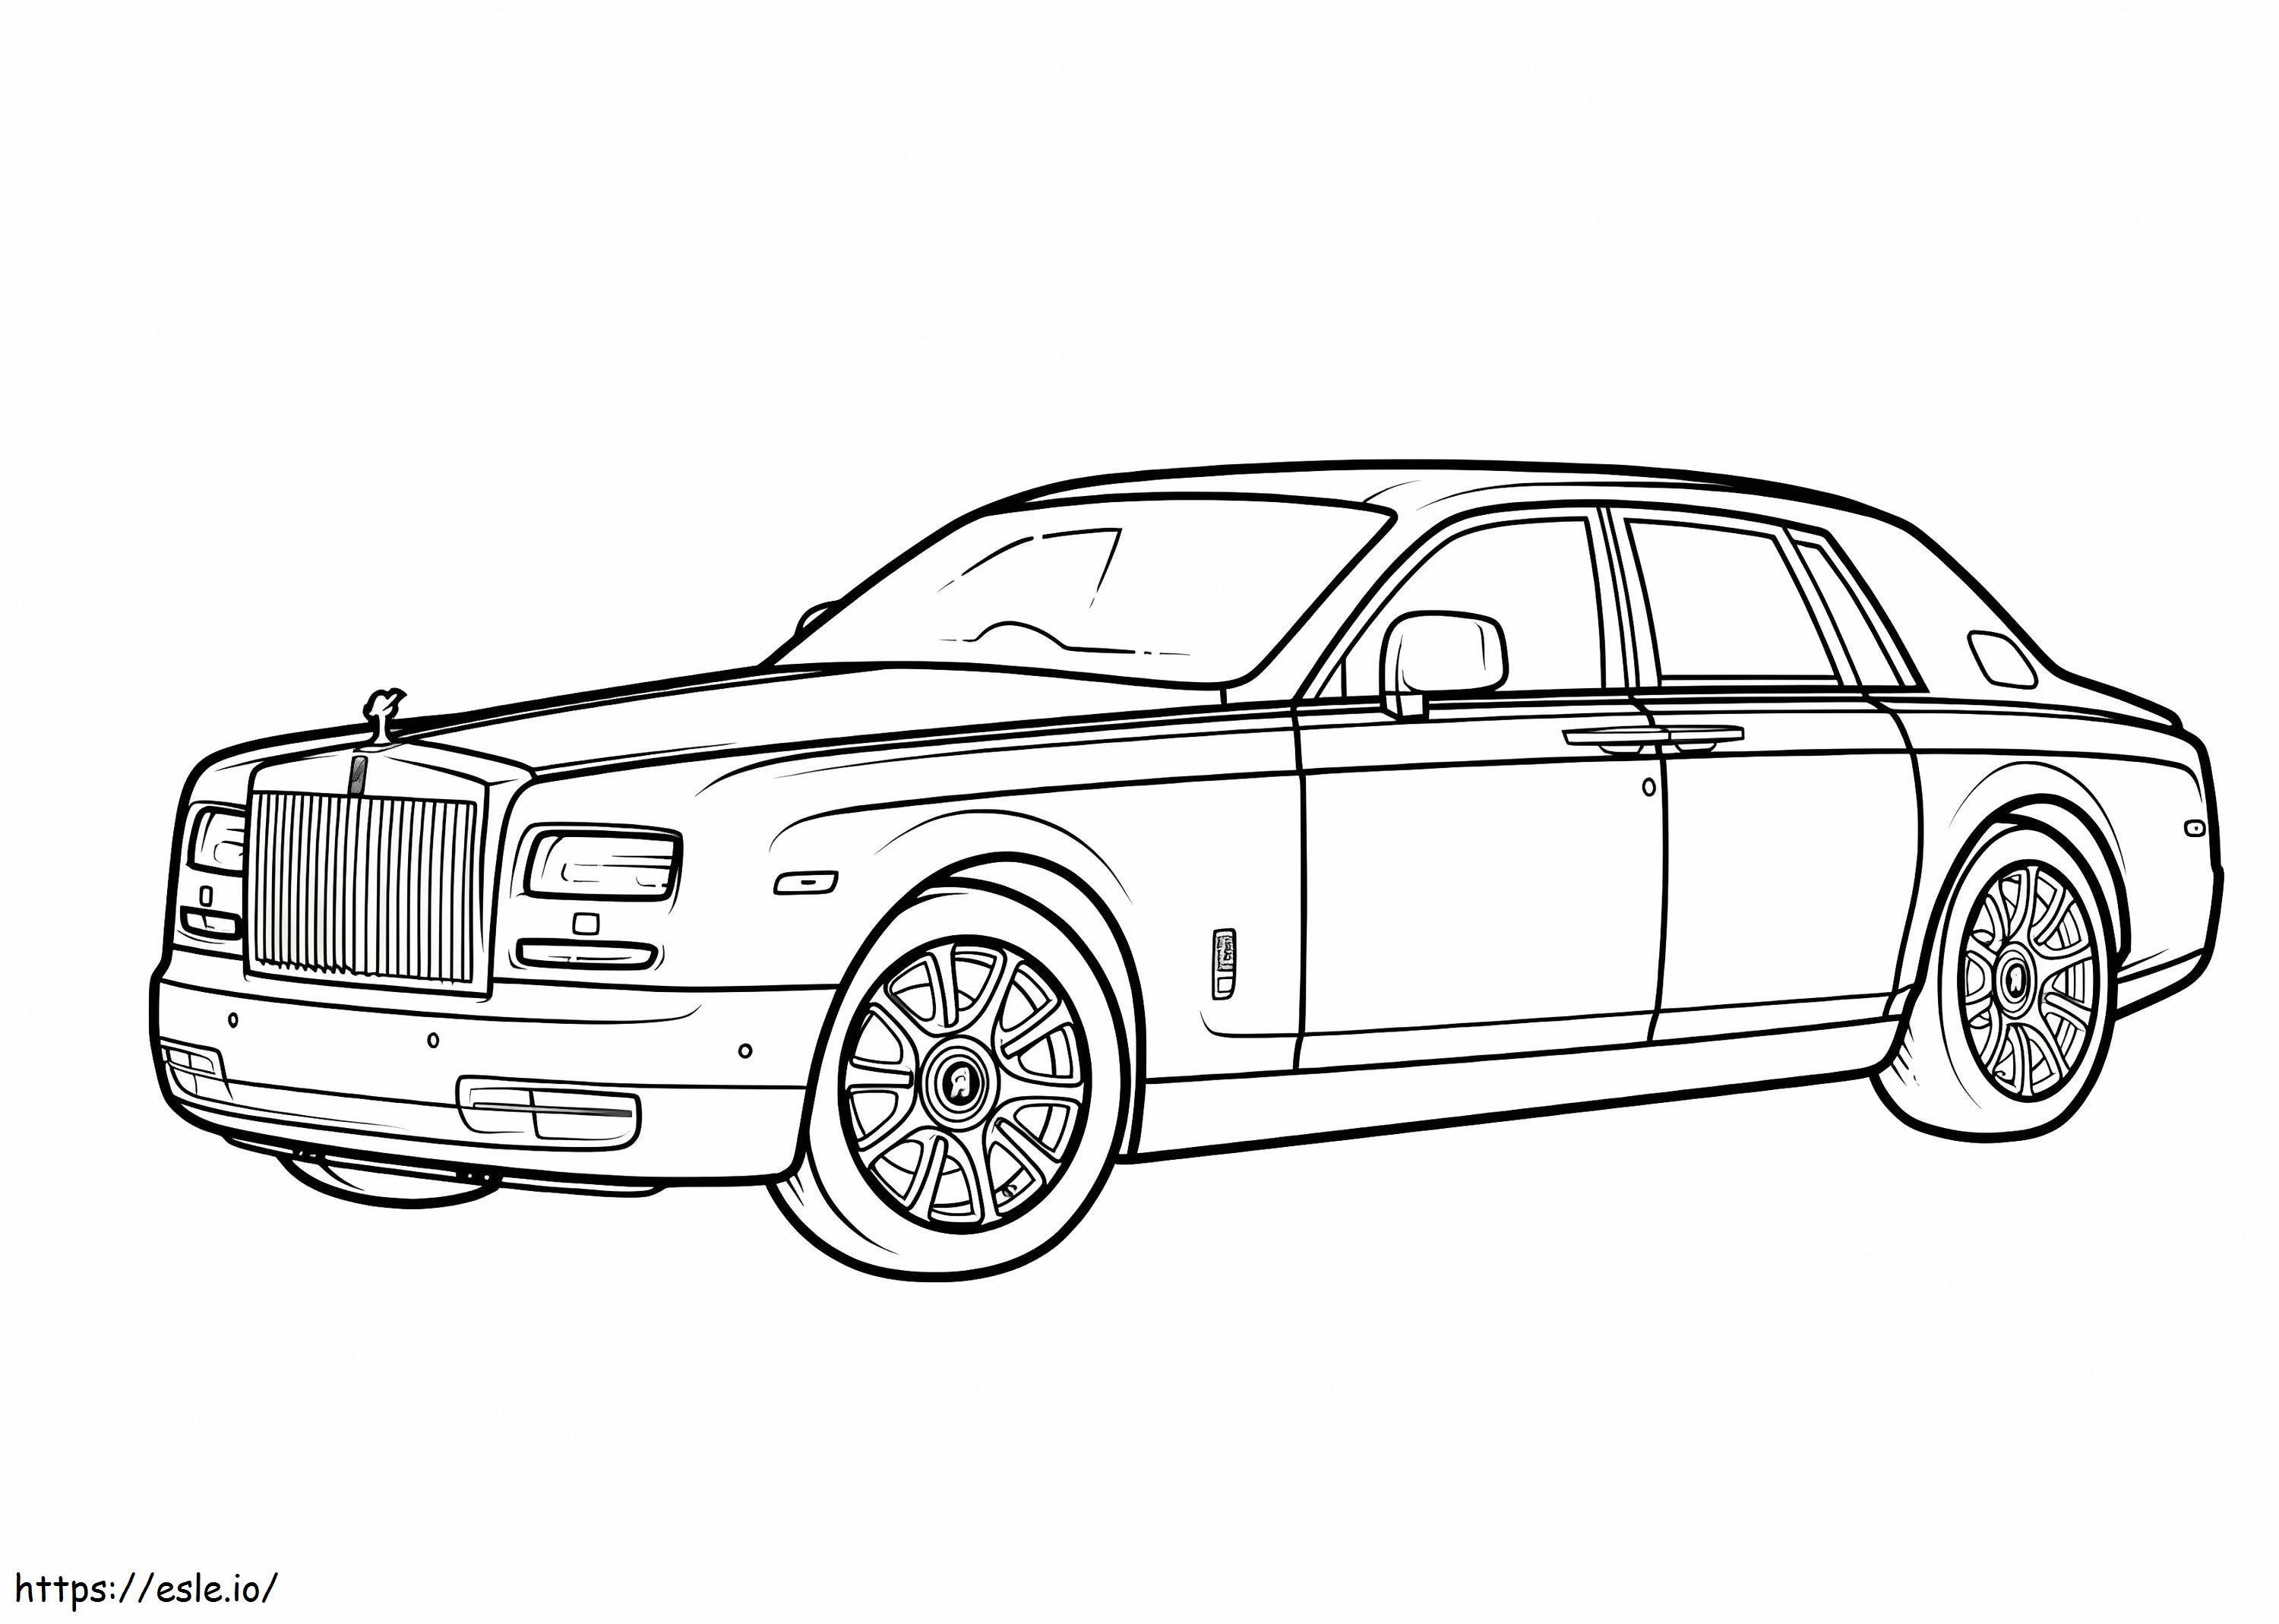 Rolls Royce Car coloring page